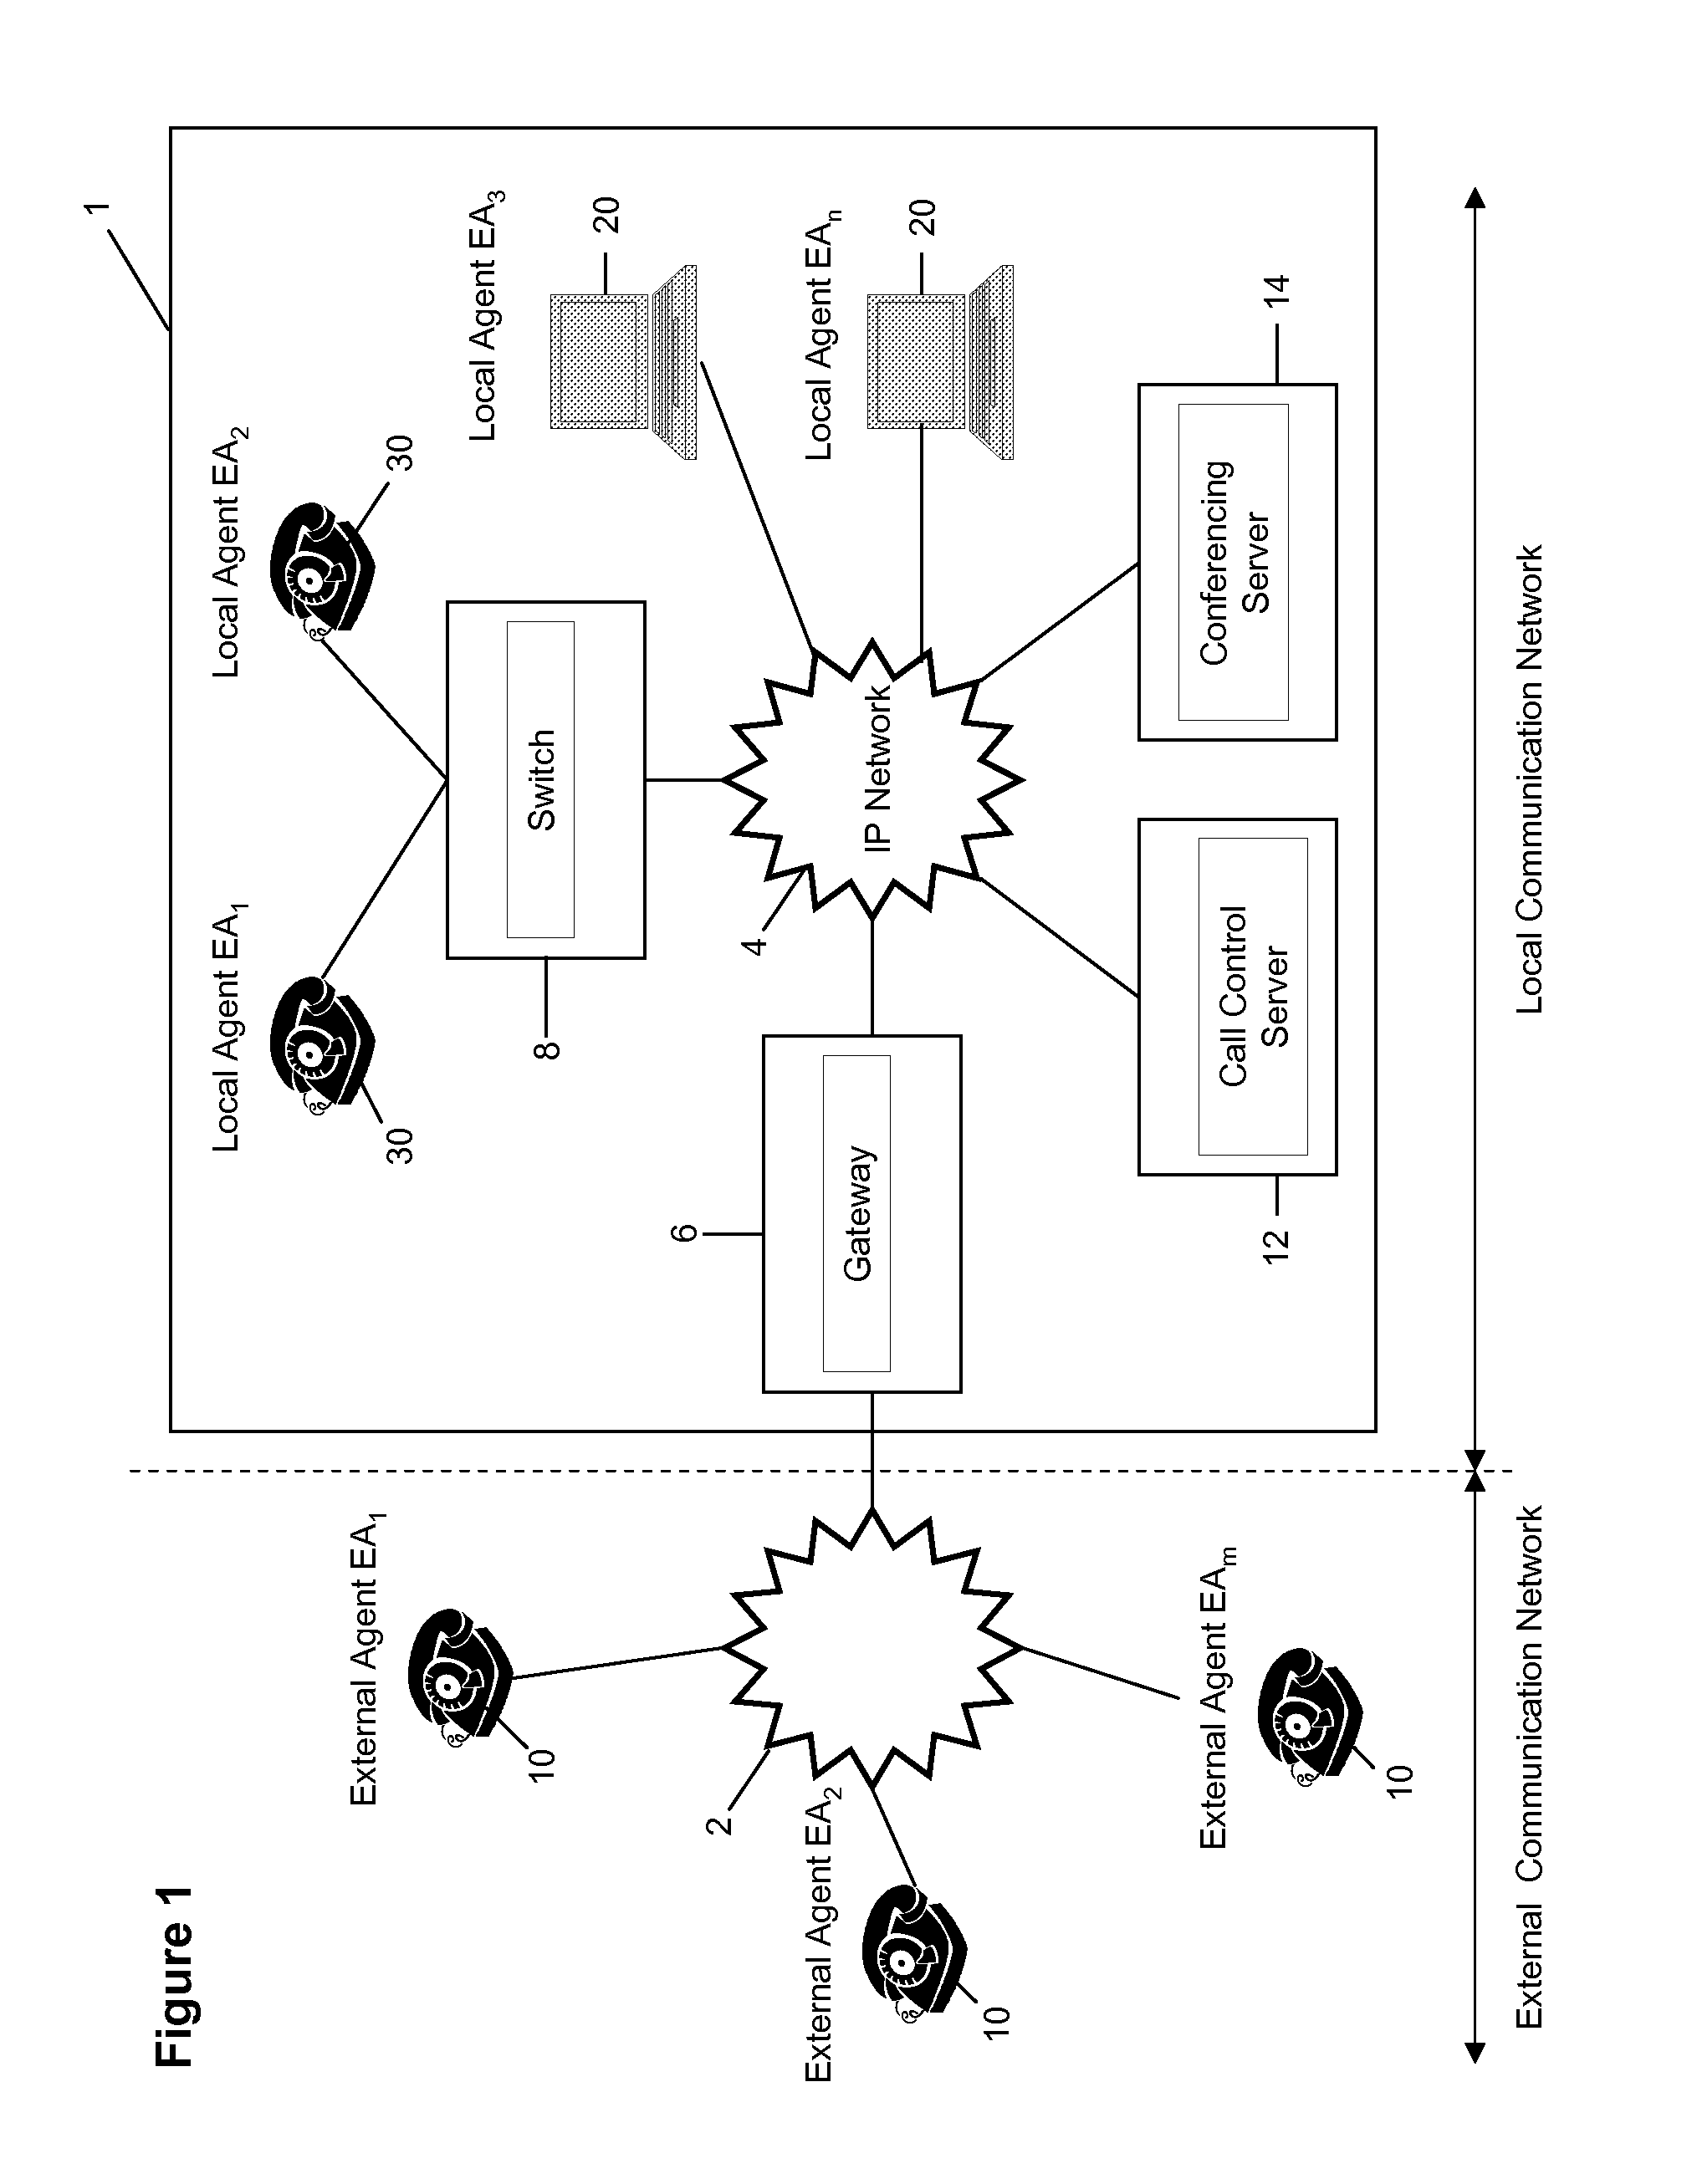 Apparatus and Method for Asymmetrical Conferencing Between Local and External Transceivers